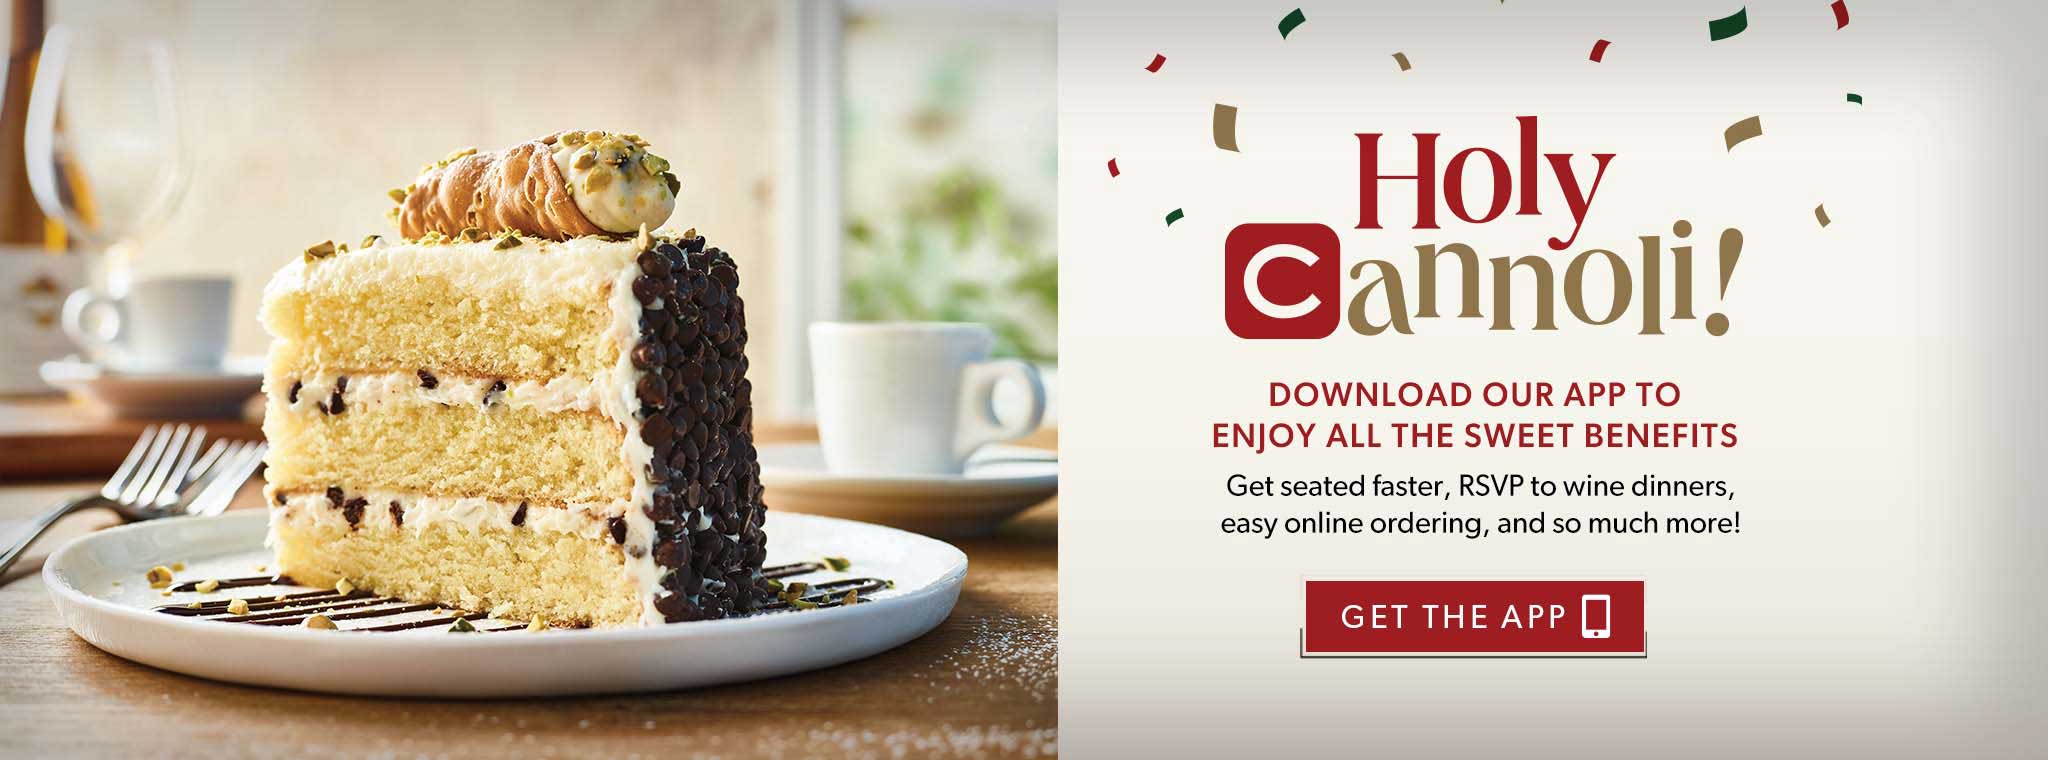 Holy Cannoli - Download Our App To Enjoy All The Sweet Benefits